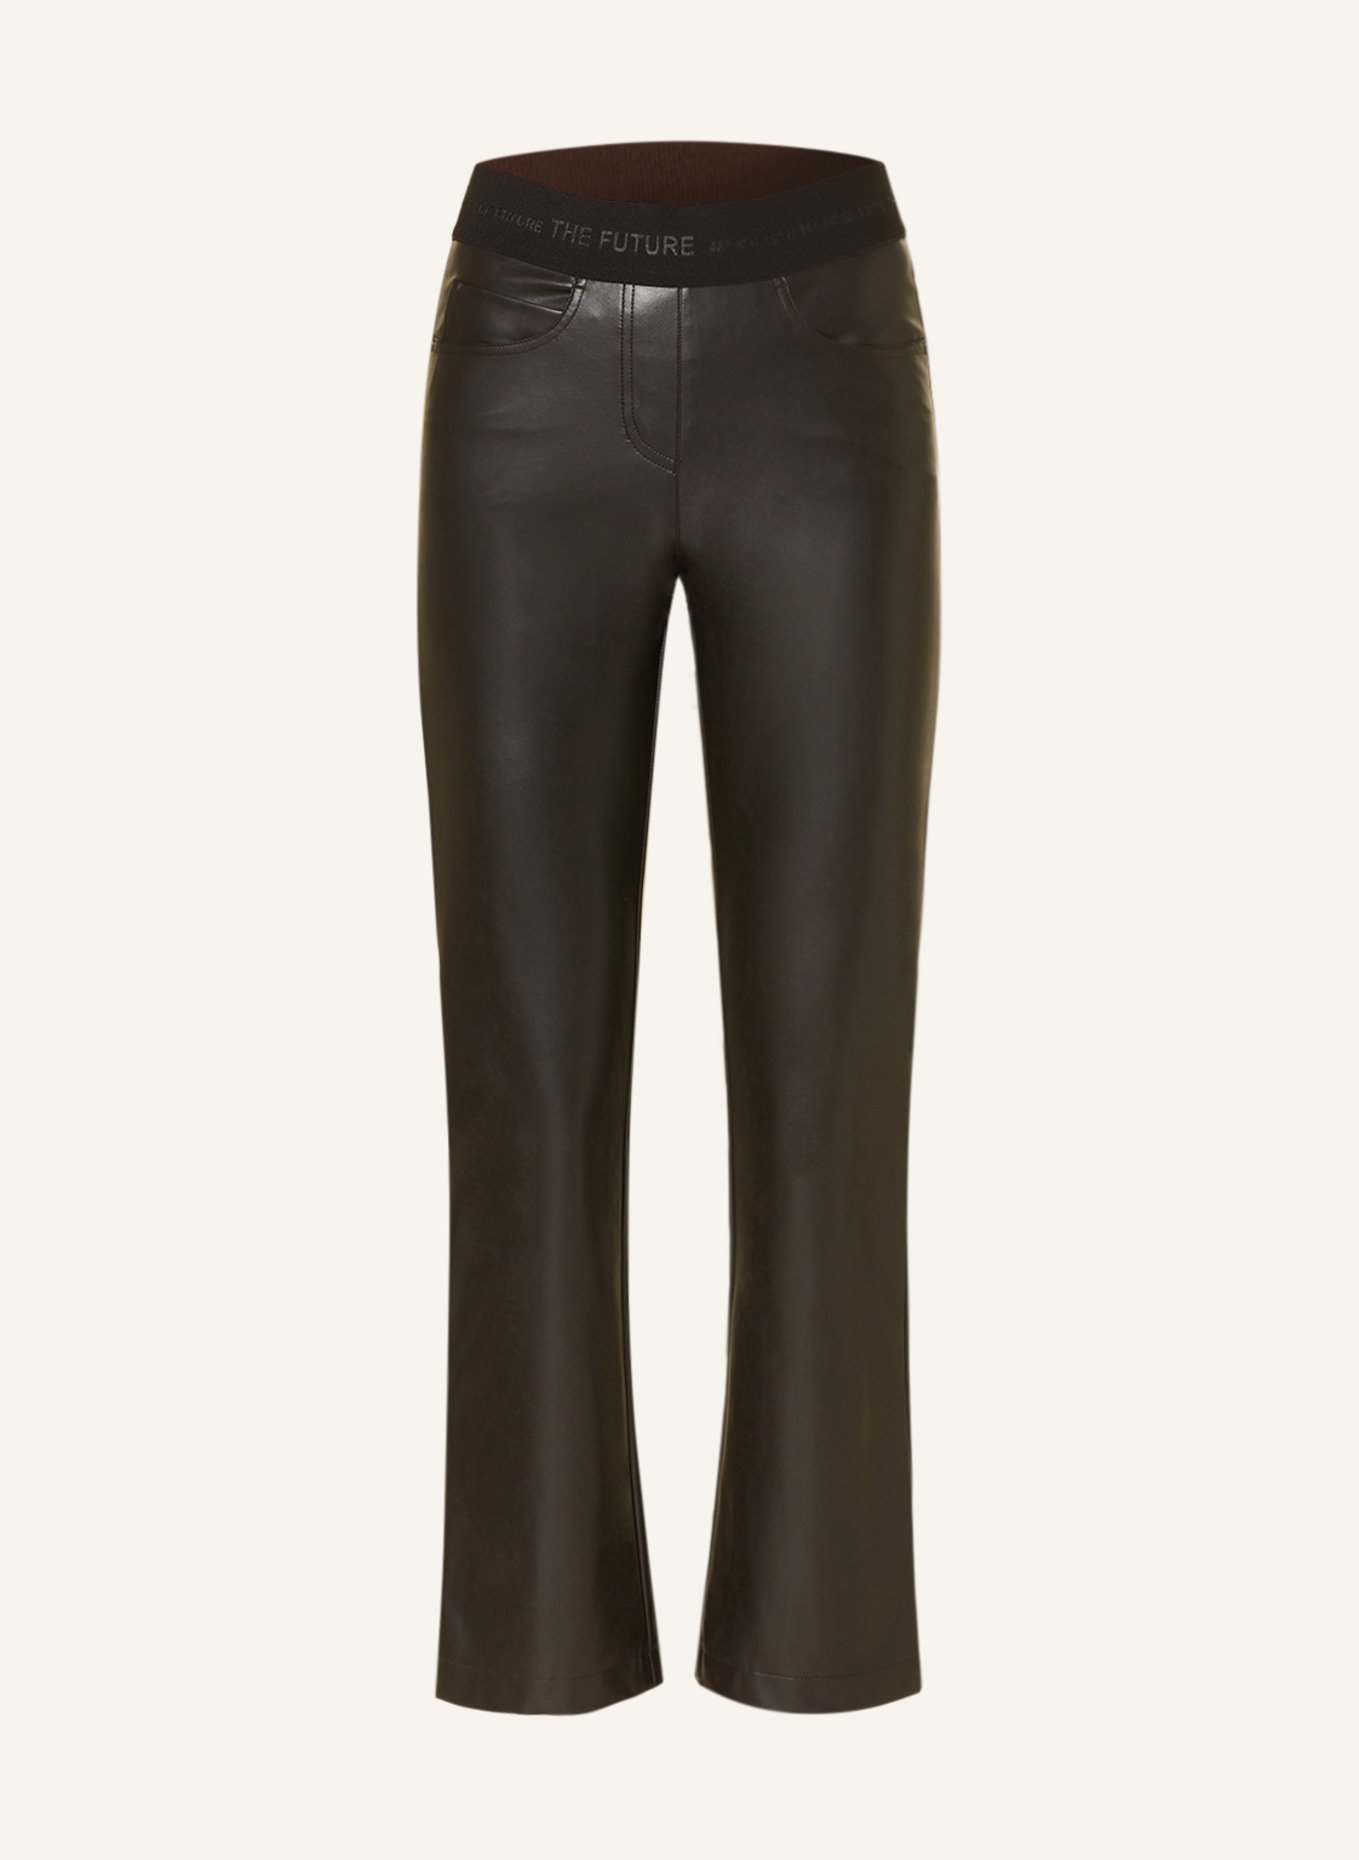 CAMBIO Trousers FELICE in leather look, Color: DARK BROWN (Image 1)